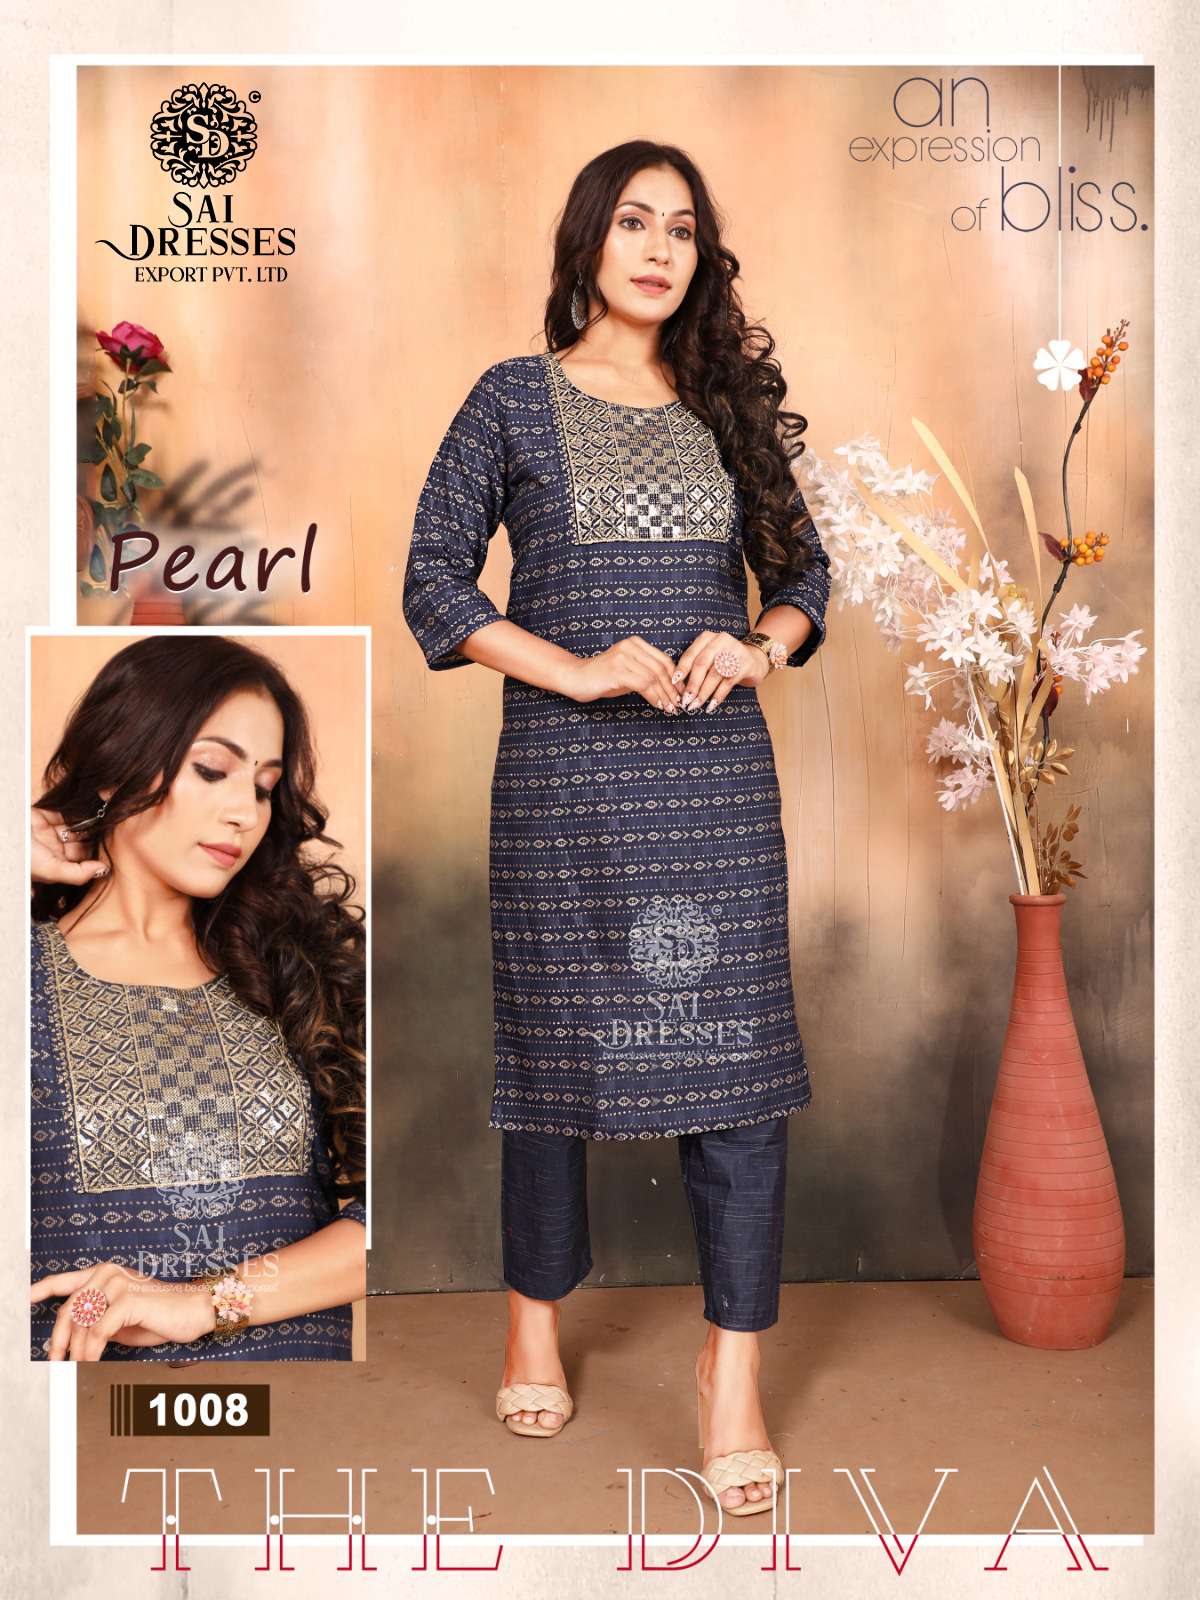 SAI DRESSES PRESENT PEARL READY TO DAILY WEAR STRAIGHT KURTI WITH PANT IN WHOLESALE RATE IN SURAT